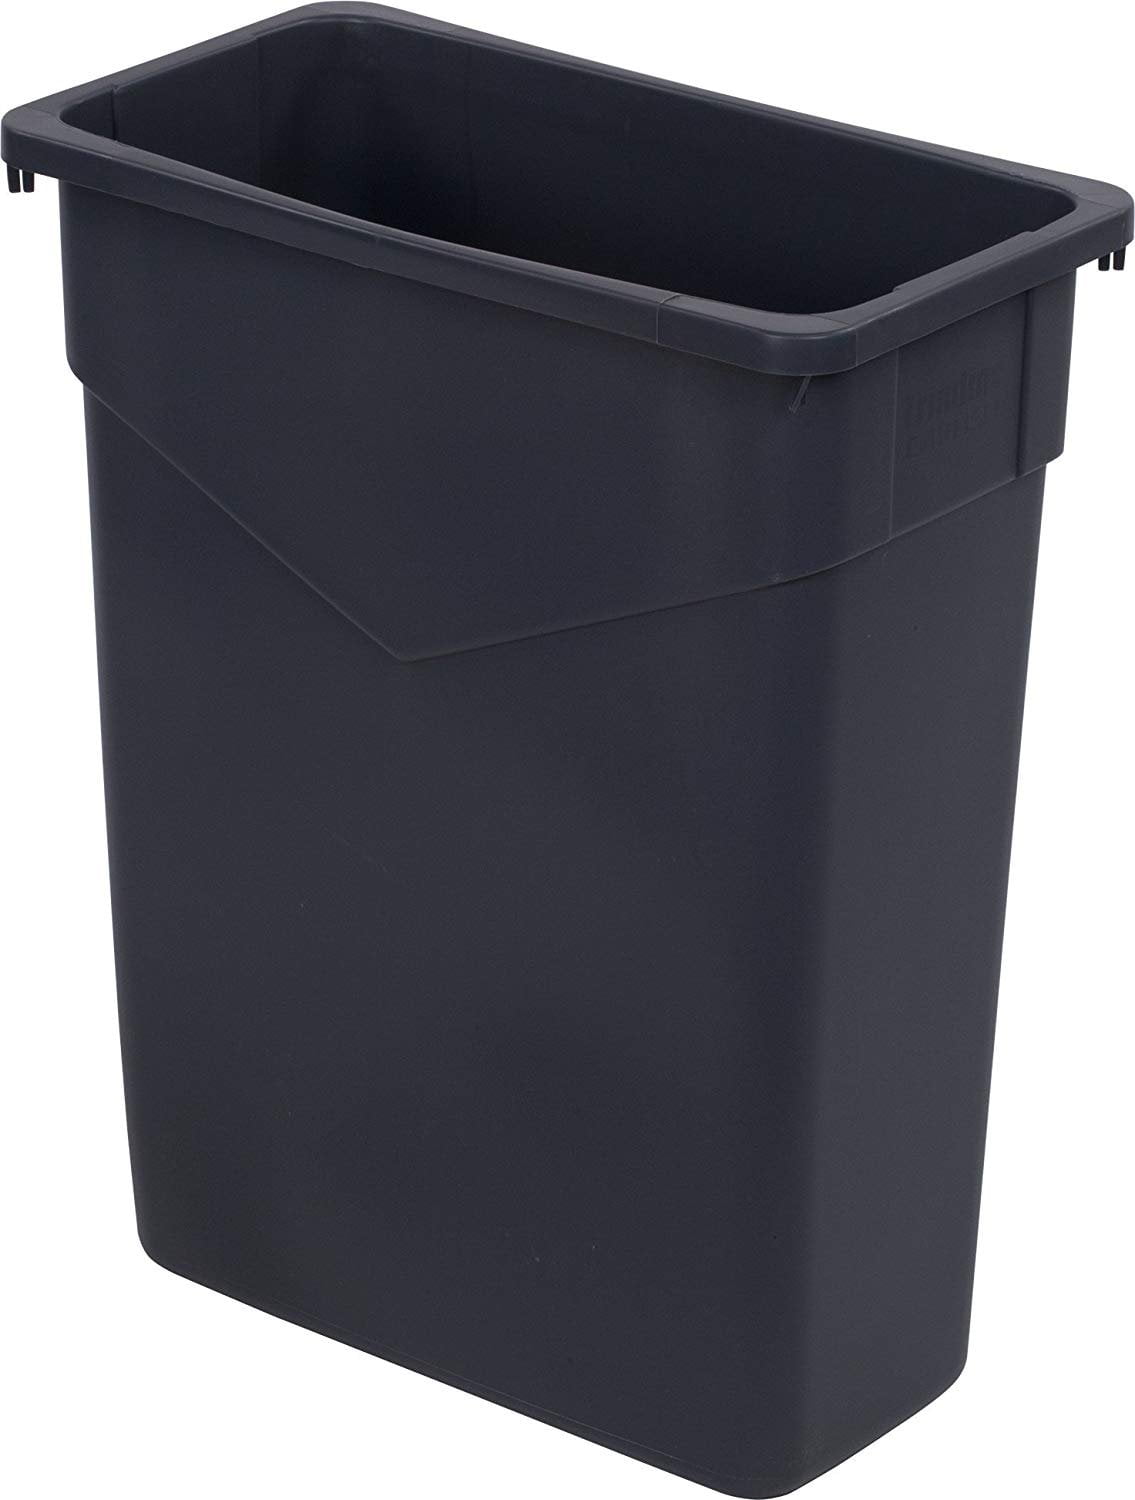  Trash Bags 15 Gallon, 50 Pcs size (24” x 31”) Double Ply  Fortified Black Trash Can Liners, Kitchen Garbage Bags for Warehouse,  Household or Office, flat top leak-proof bags, lasting value 